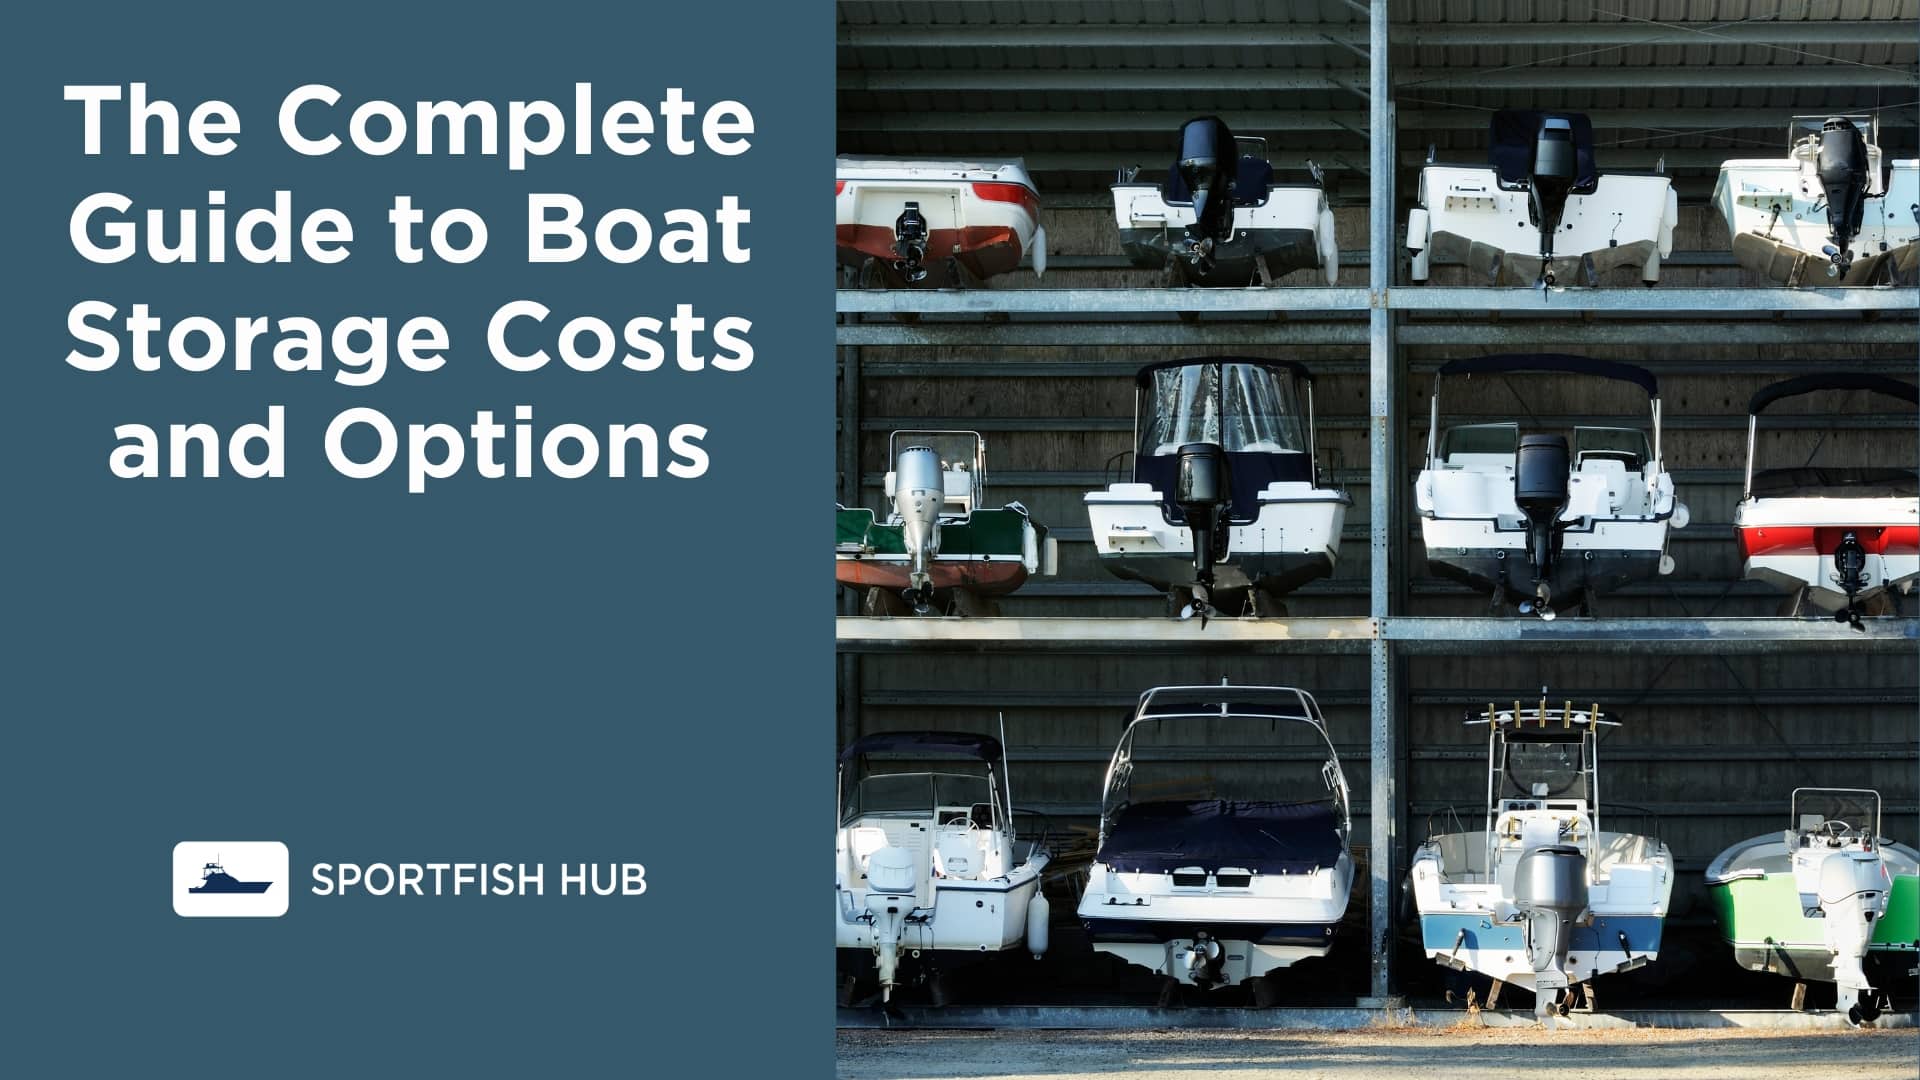 The Complete Guide to Boat Storage Costs and Options